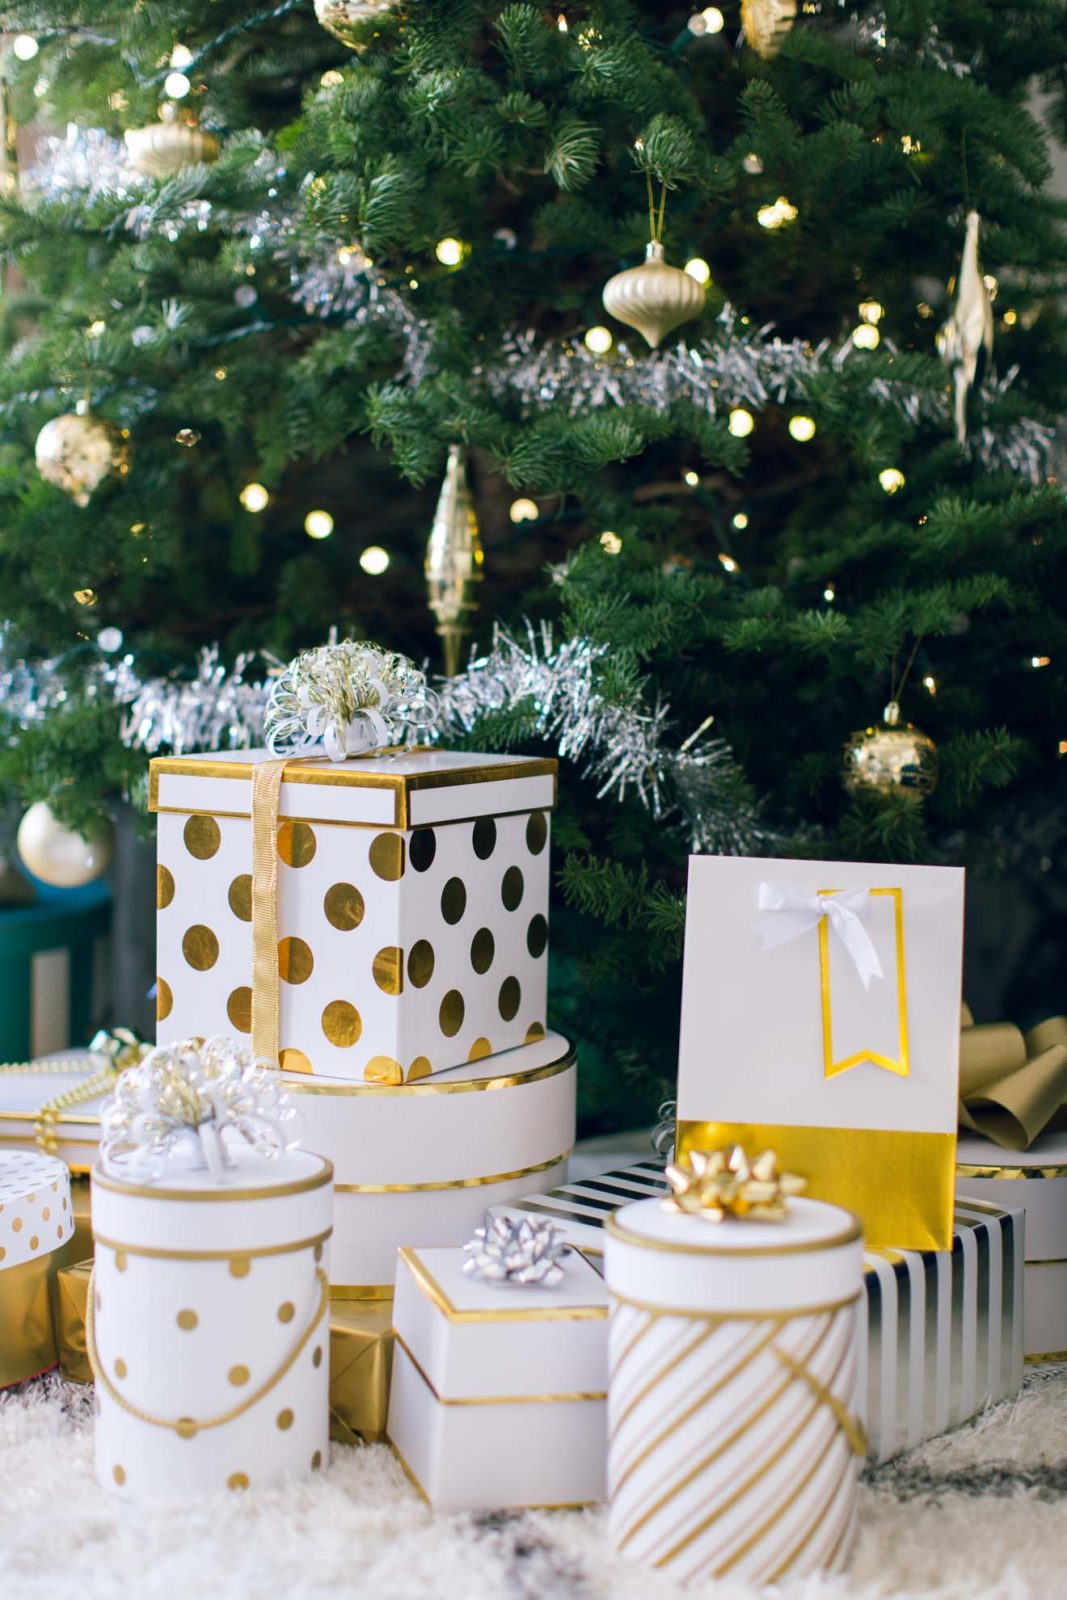 12 Days of Holiday Style | Target Christmas Decorations | 10 Easy Holiday Home Decor Ideas featured by top Los Angeles fashion blog Laura Lily